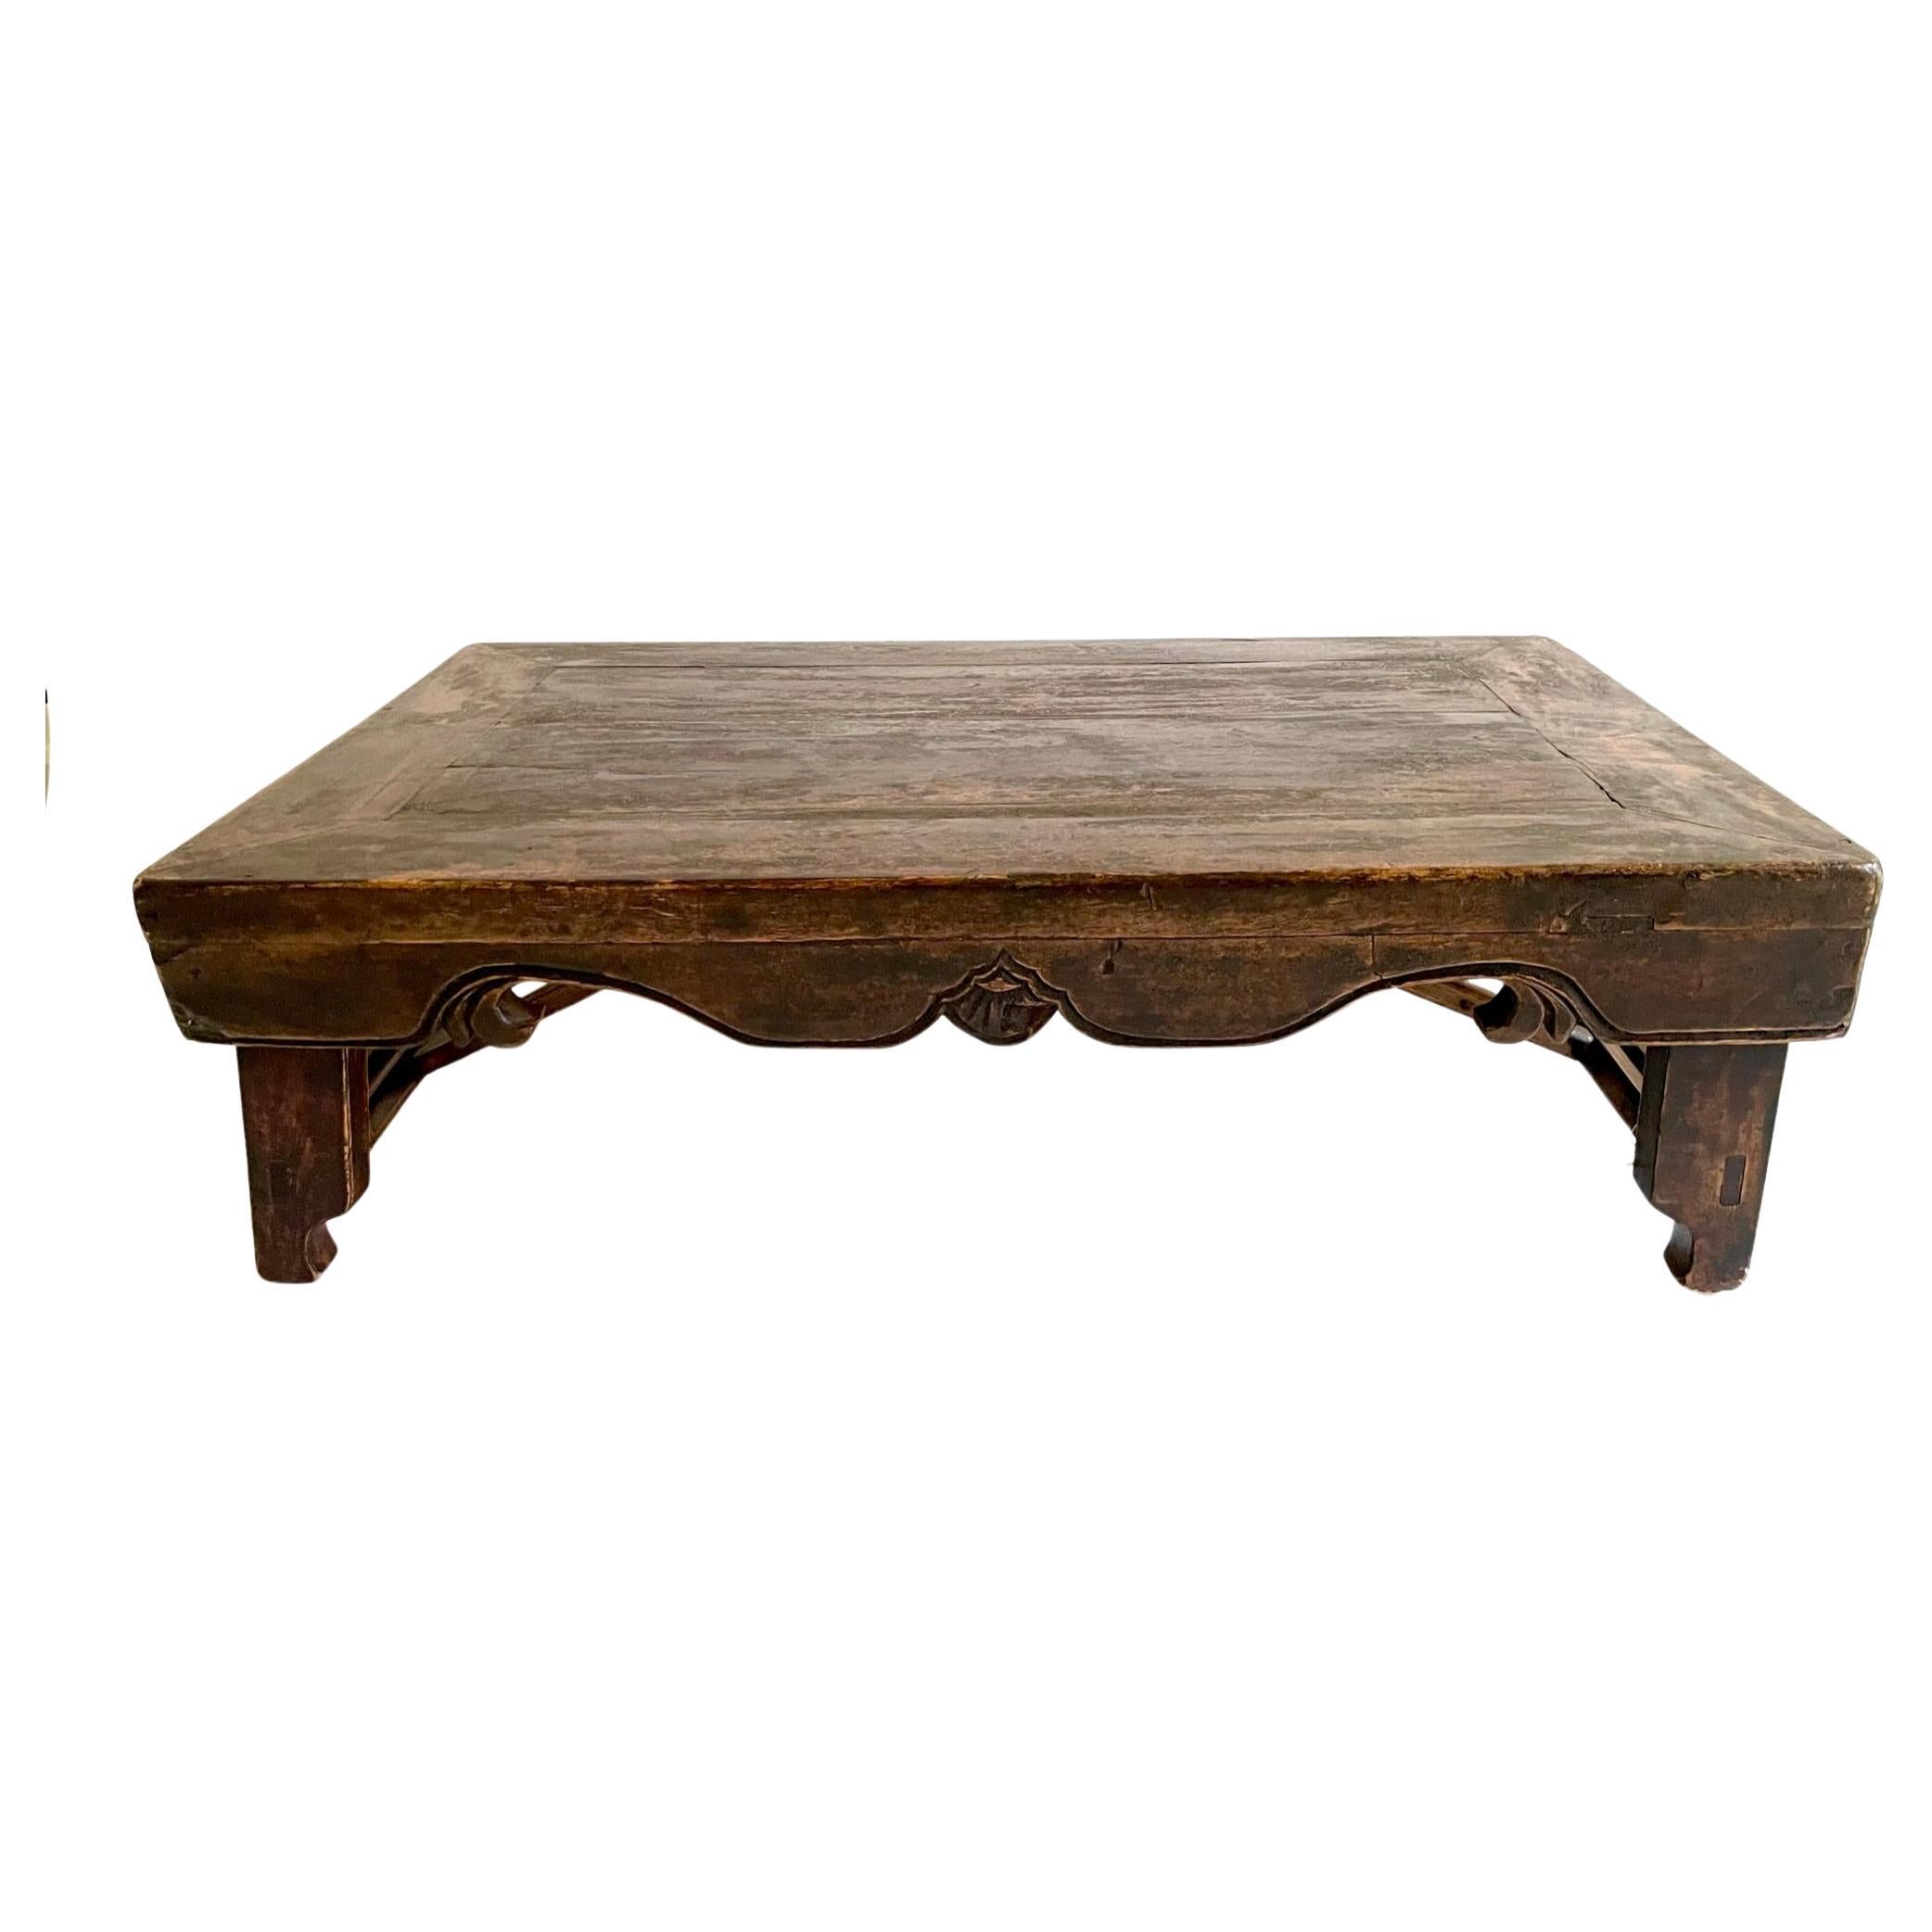 Rare 19th Century Chinese Folding Low Table 'Kang Table'